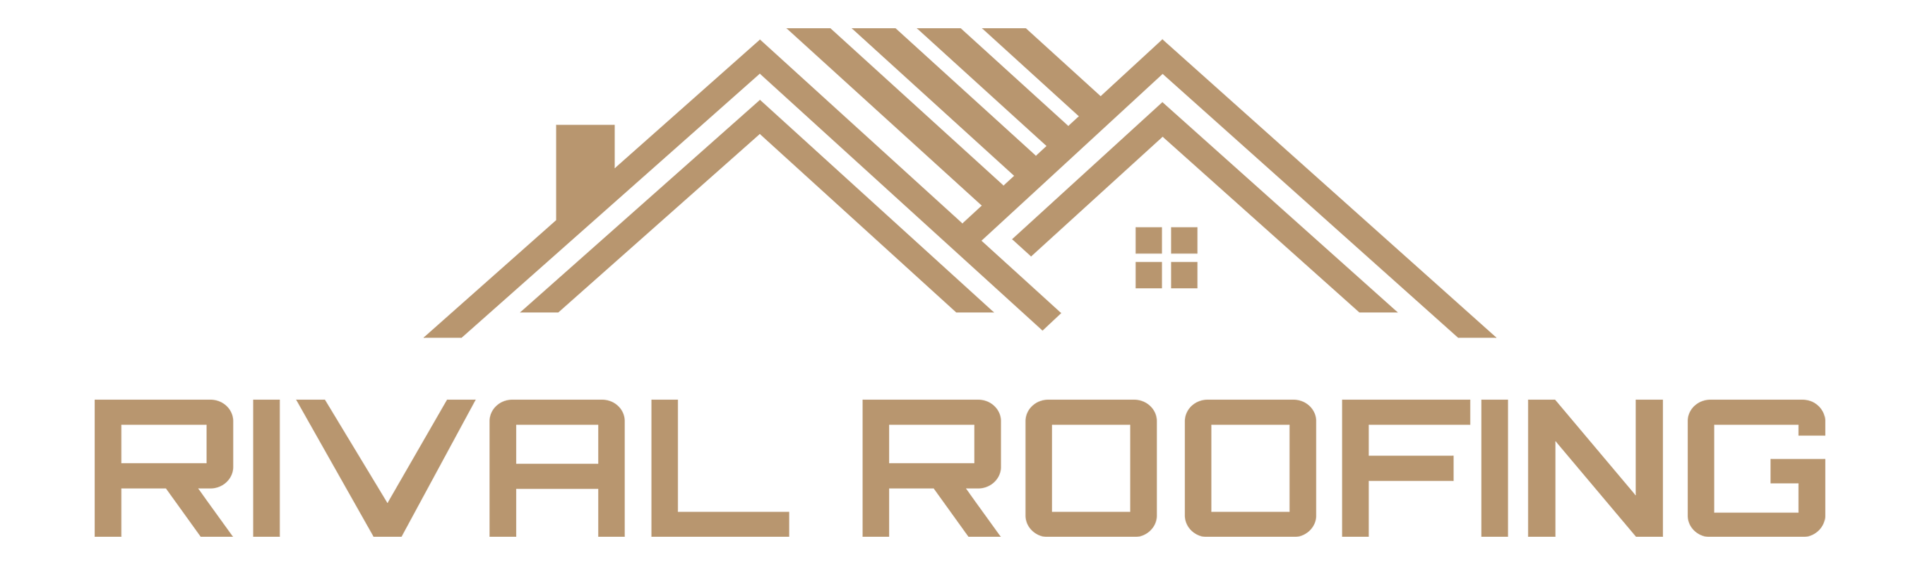 Rival Roofing Icon